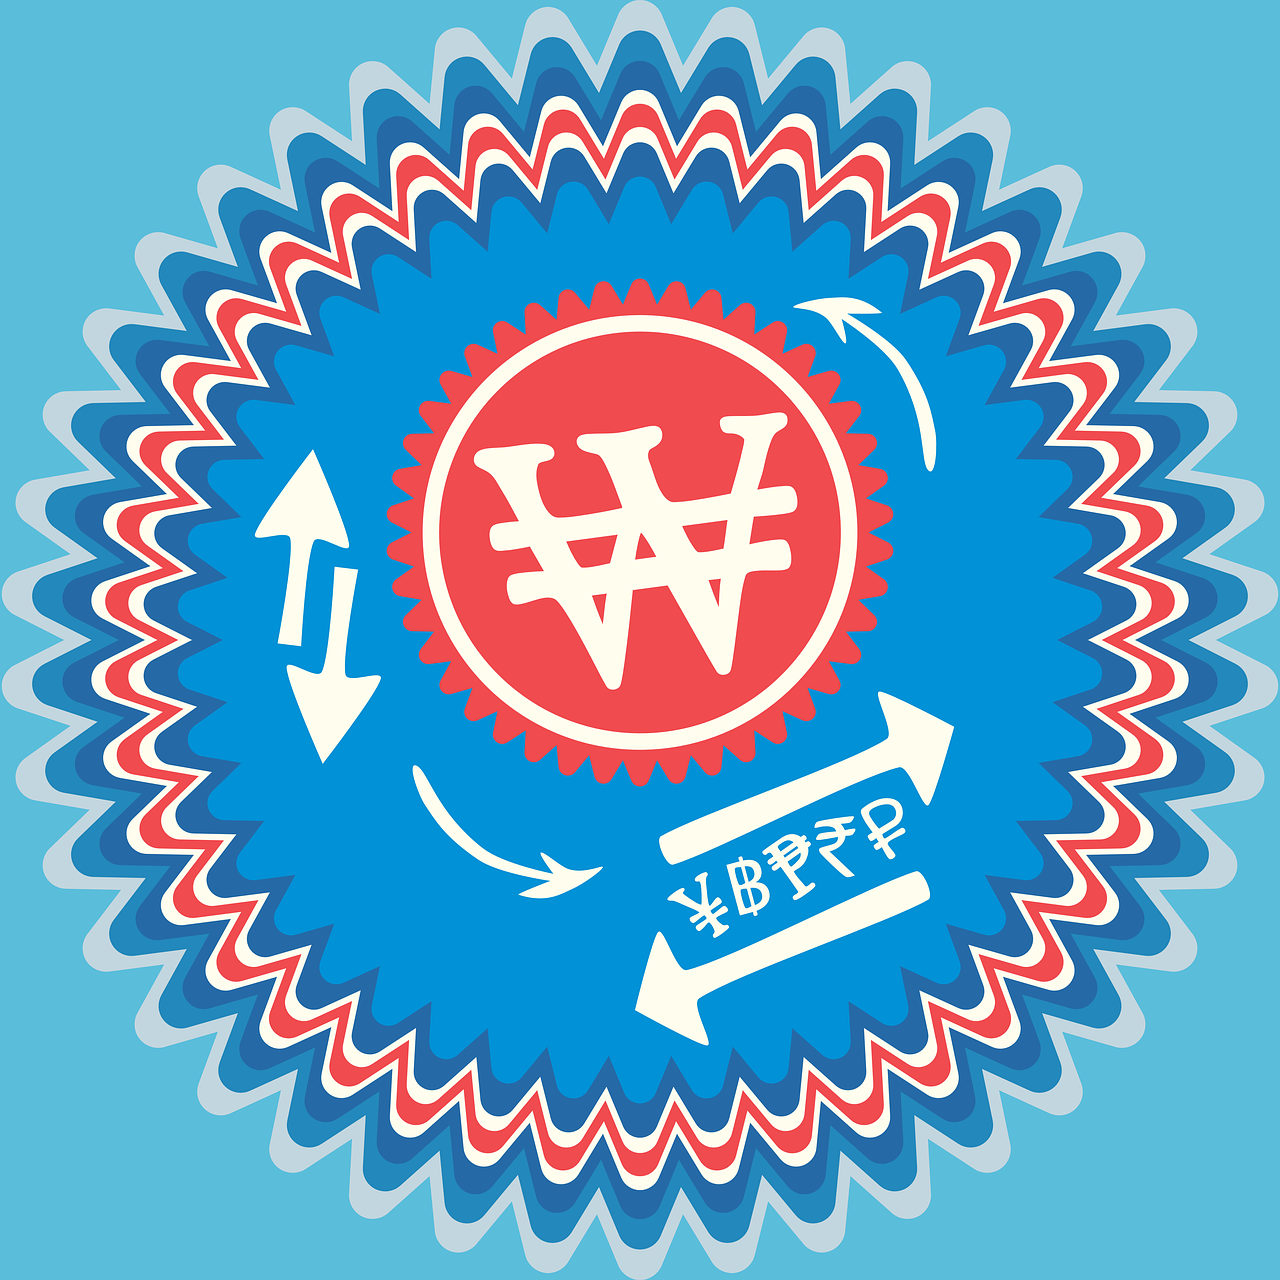 a sticker with an image of a chinese currency symbol, inspired by Washington Allston, behance contest winner, viennese actionism, blue and red color scheme, waterwheels, symmetric!!, warp